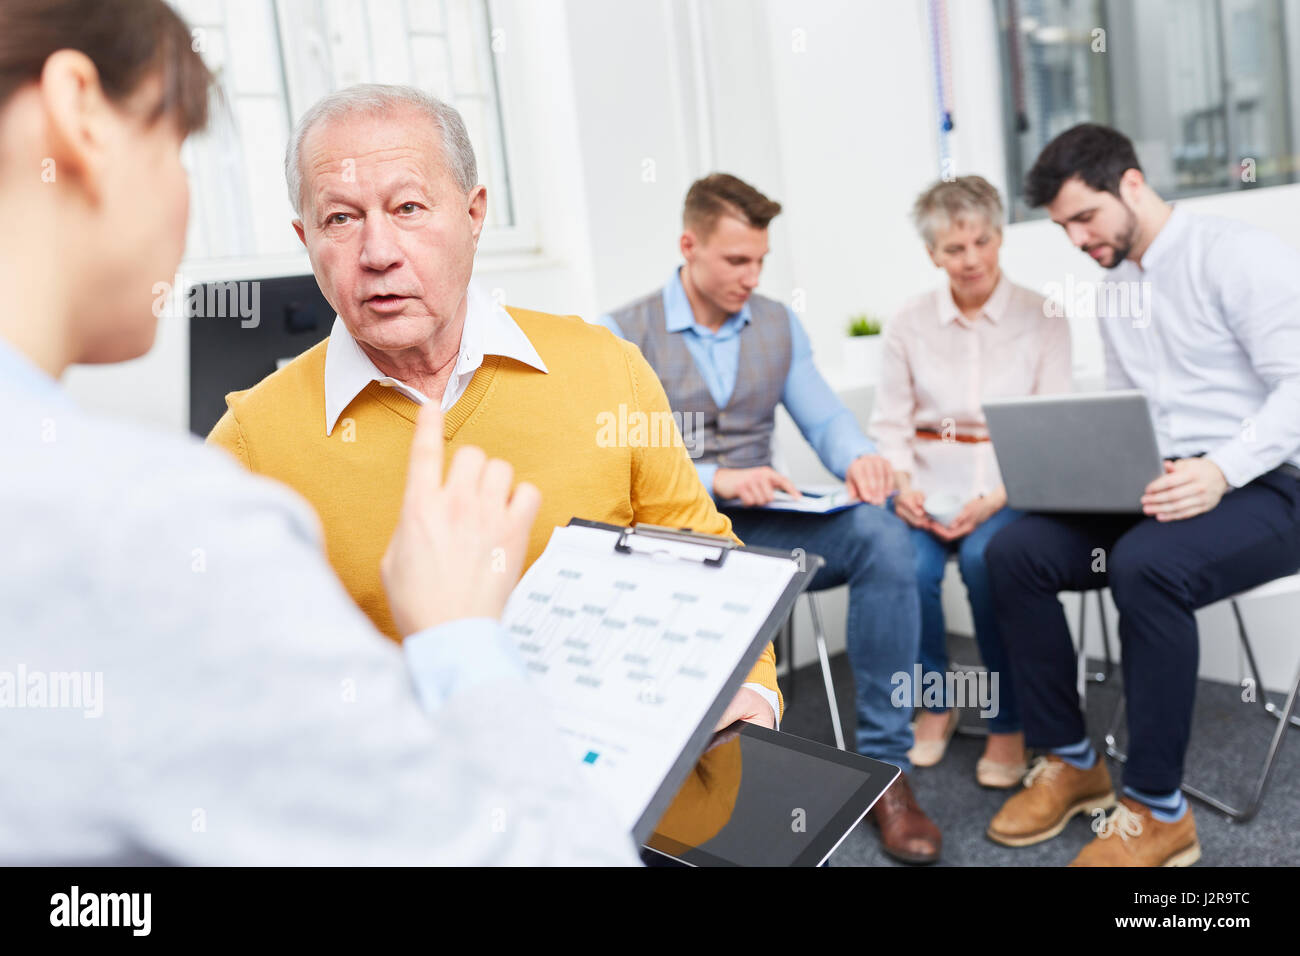 Business consulting advice concept with senior team member Stock Photo